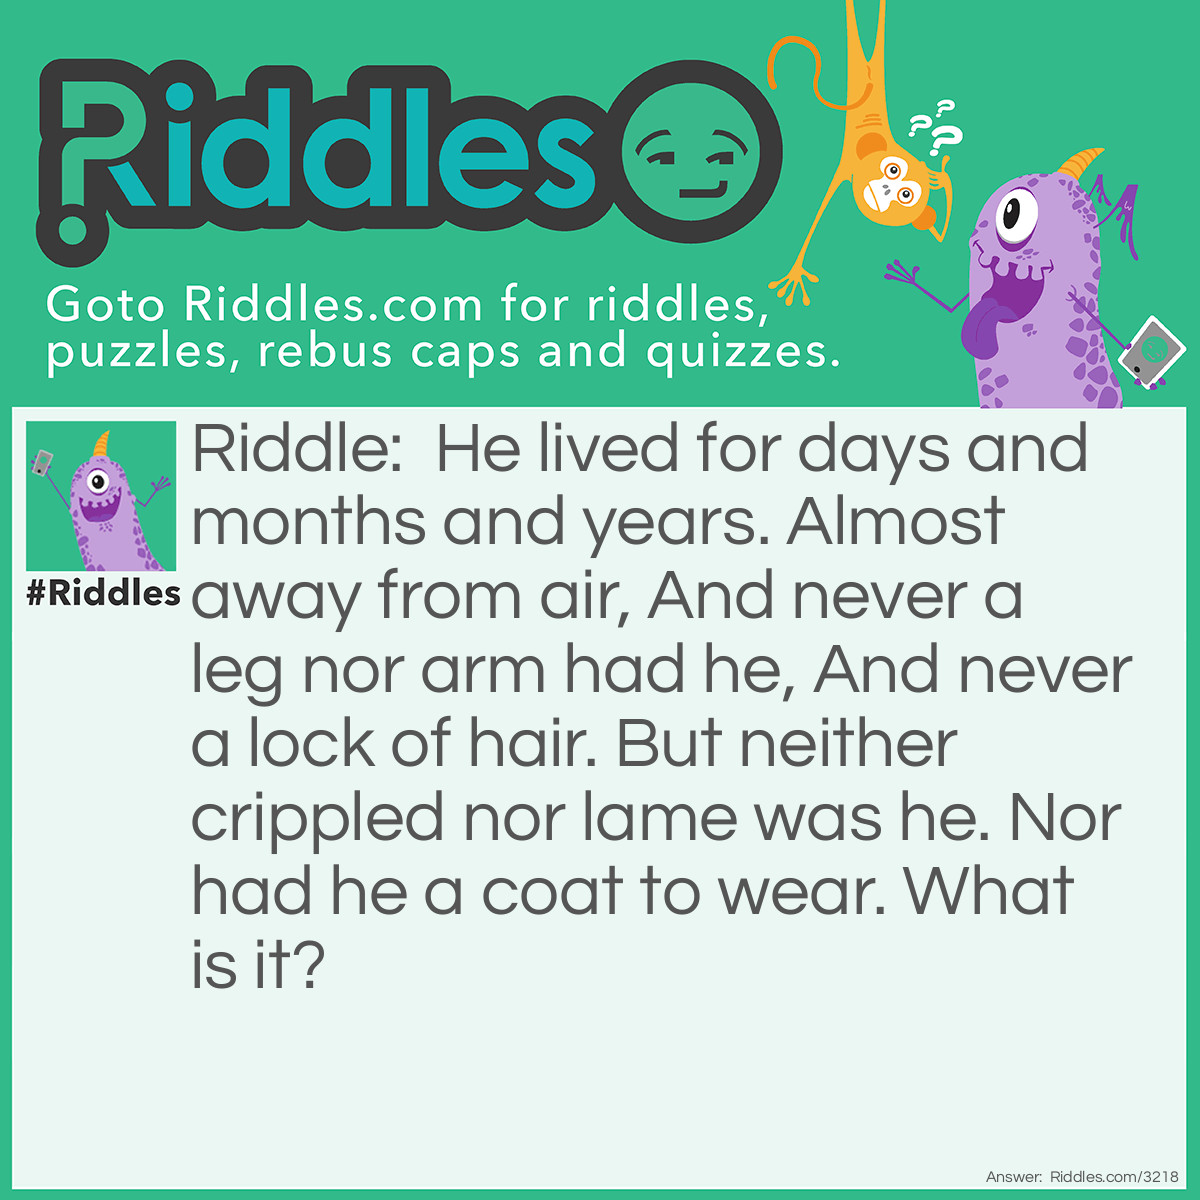 Riddle: He lived for days and months and years. Almost away from air, And never a leg nor arm had he, And never a lock of hair. But neither crippled nor lame was he. Nor had he a coat to wear. What is it? Answer: A fish.